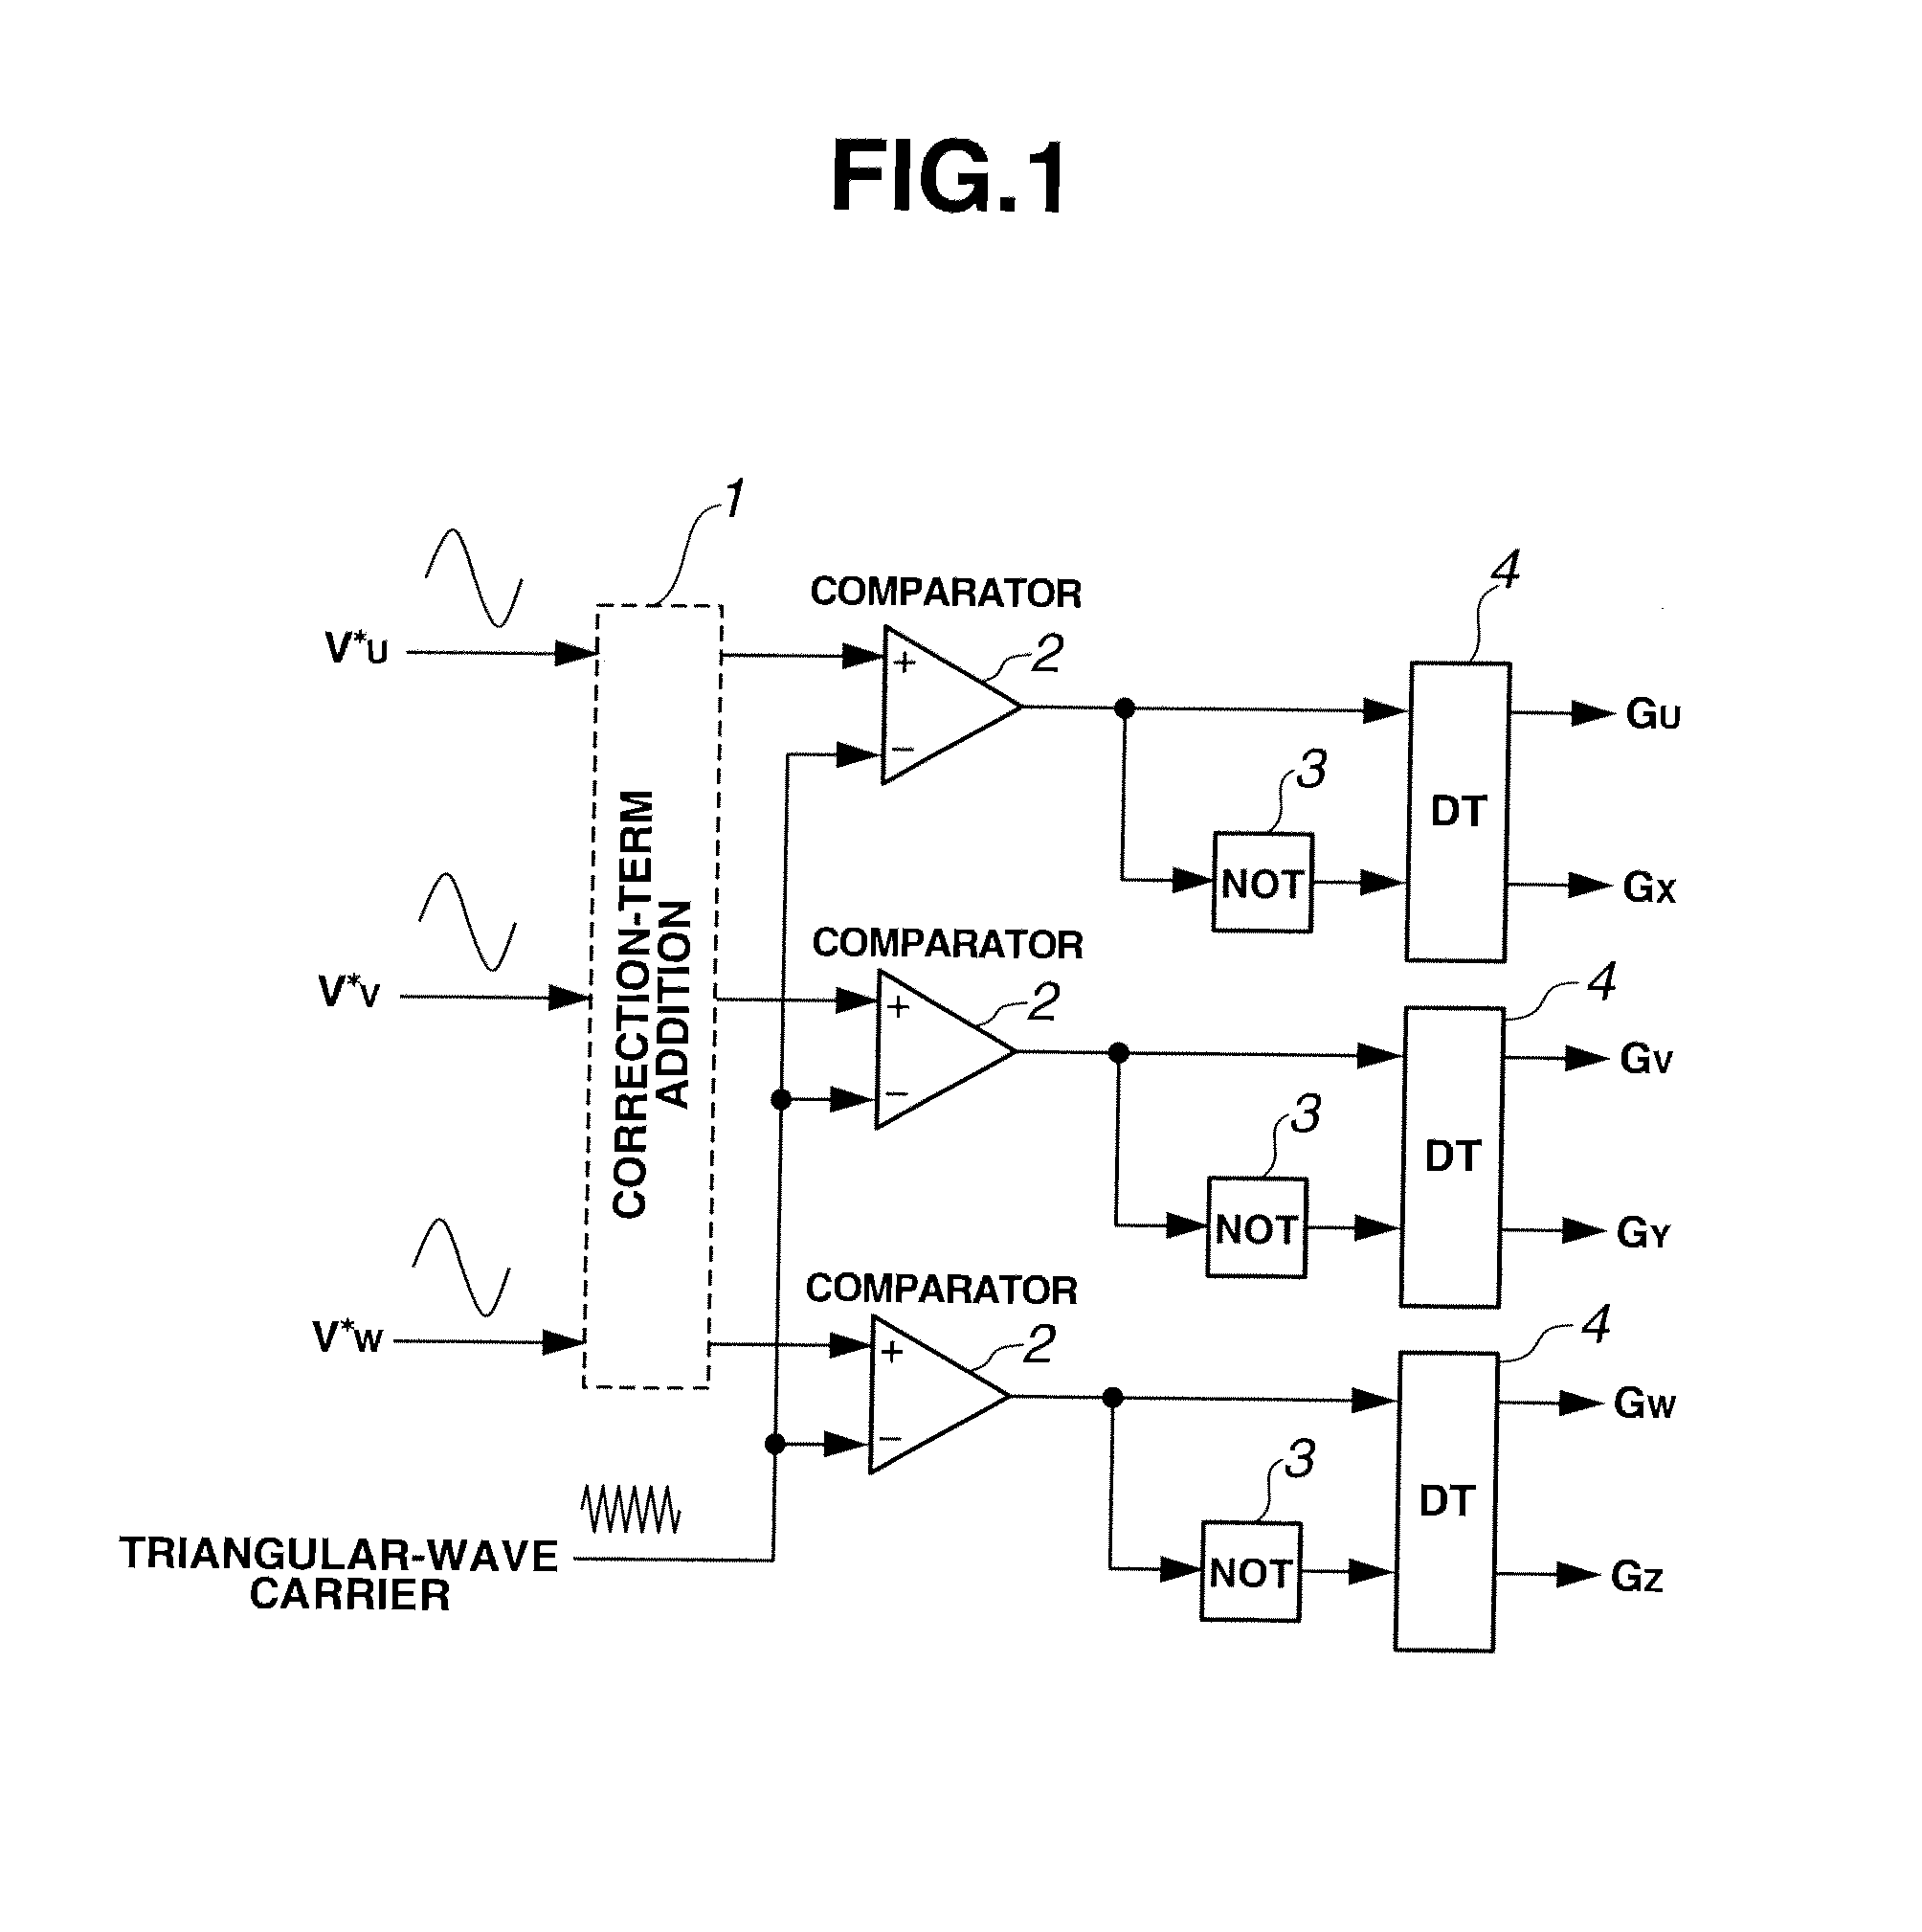 Method of controlling power conversion device